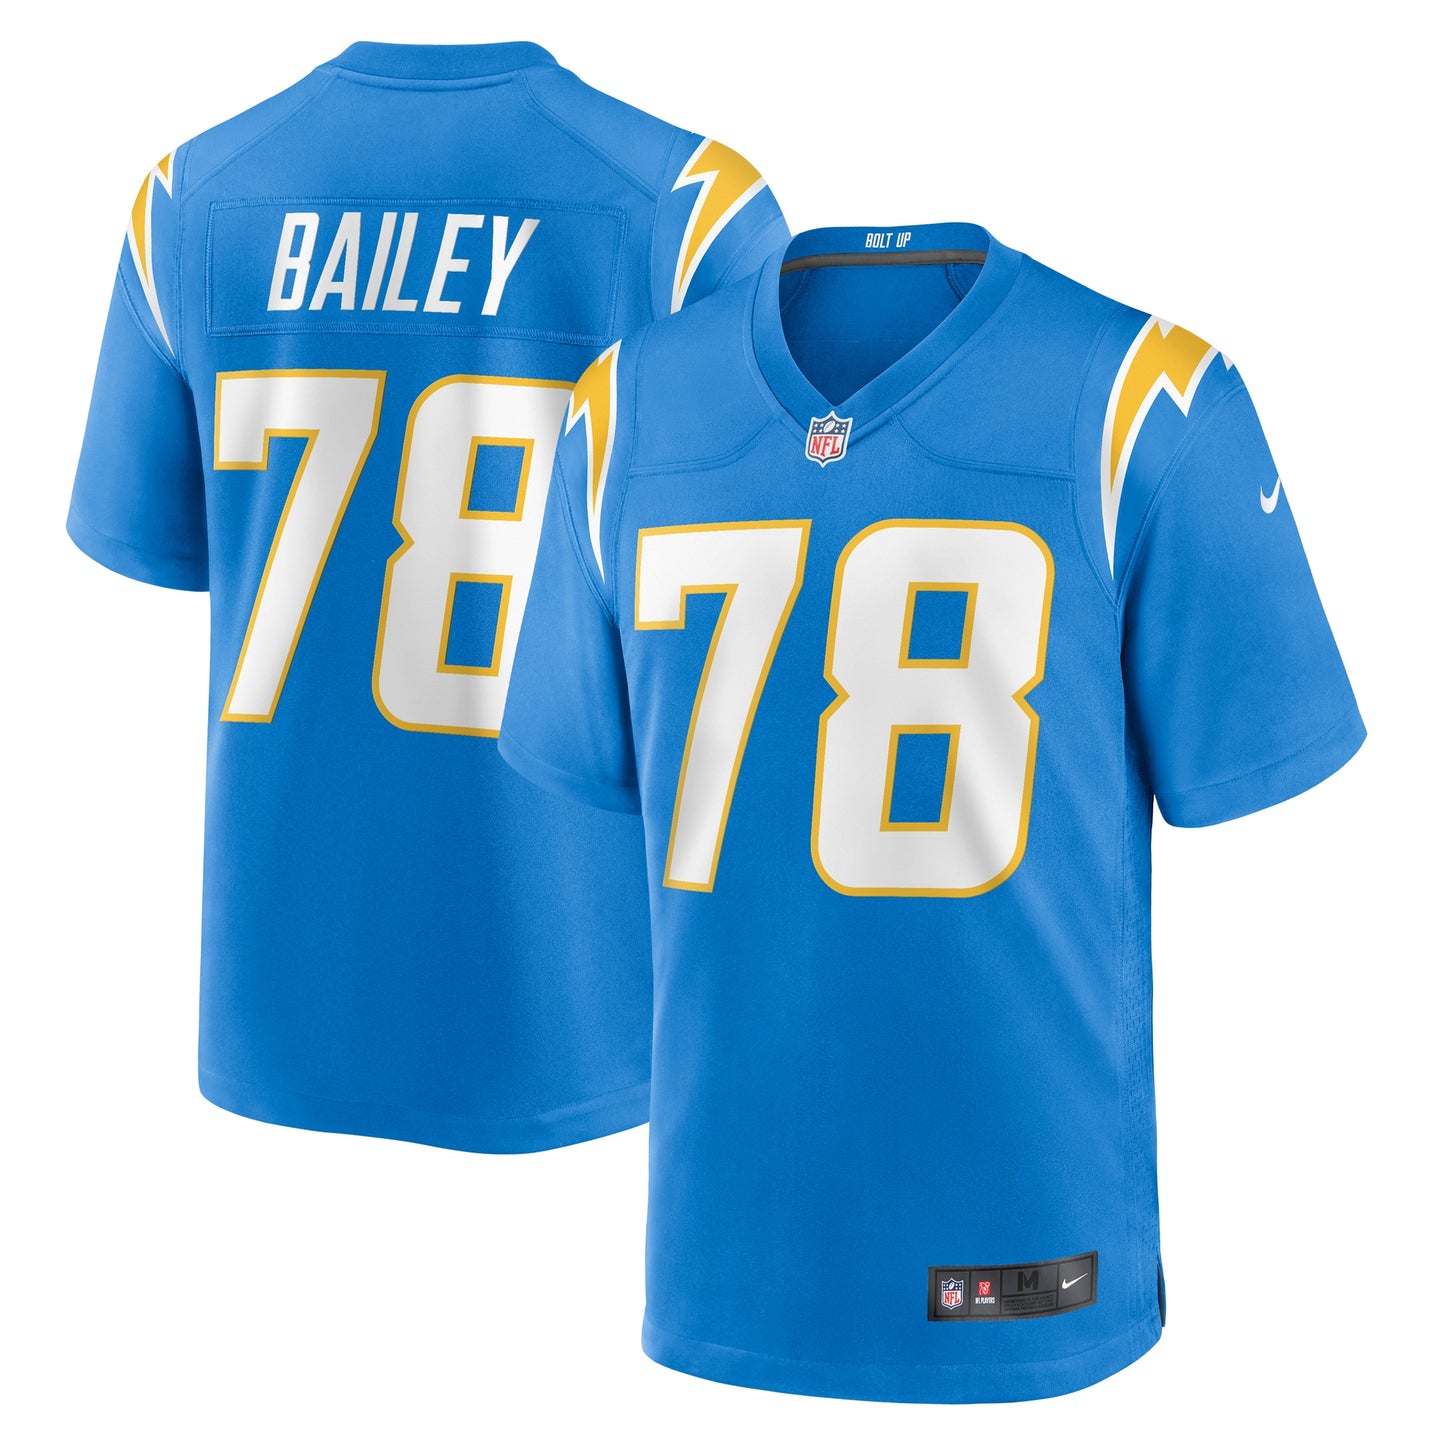 Zack Bailey Los Angeles Chargers Nike Player Game Jersey - Powder Blue